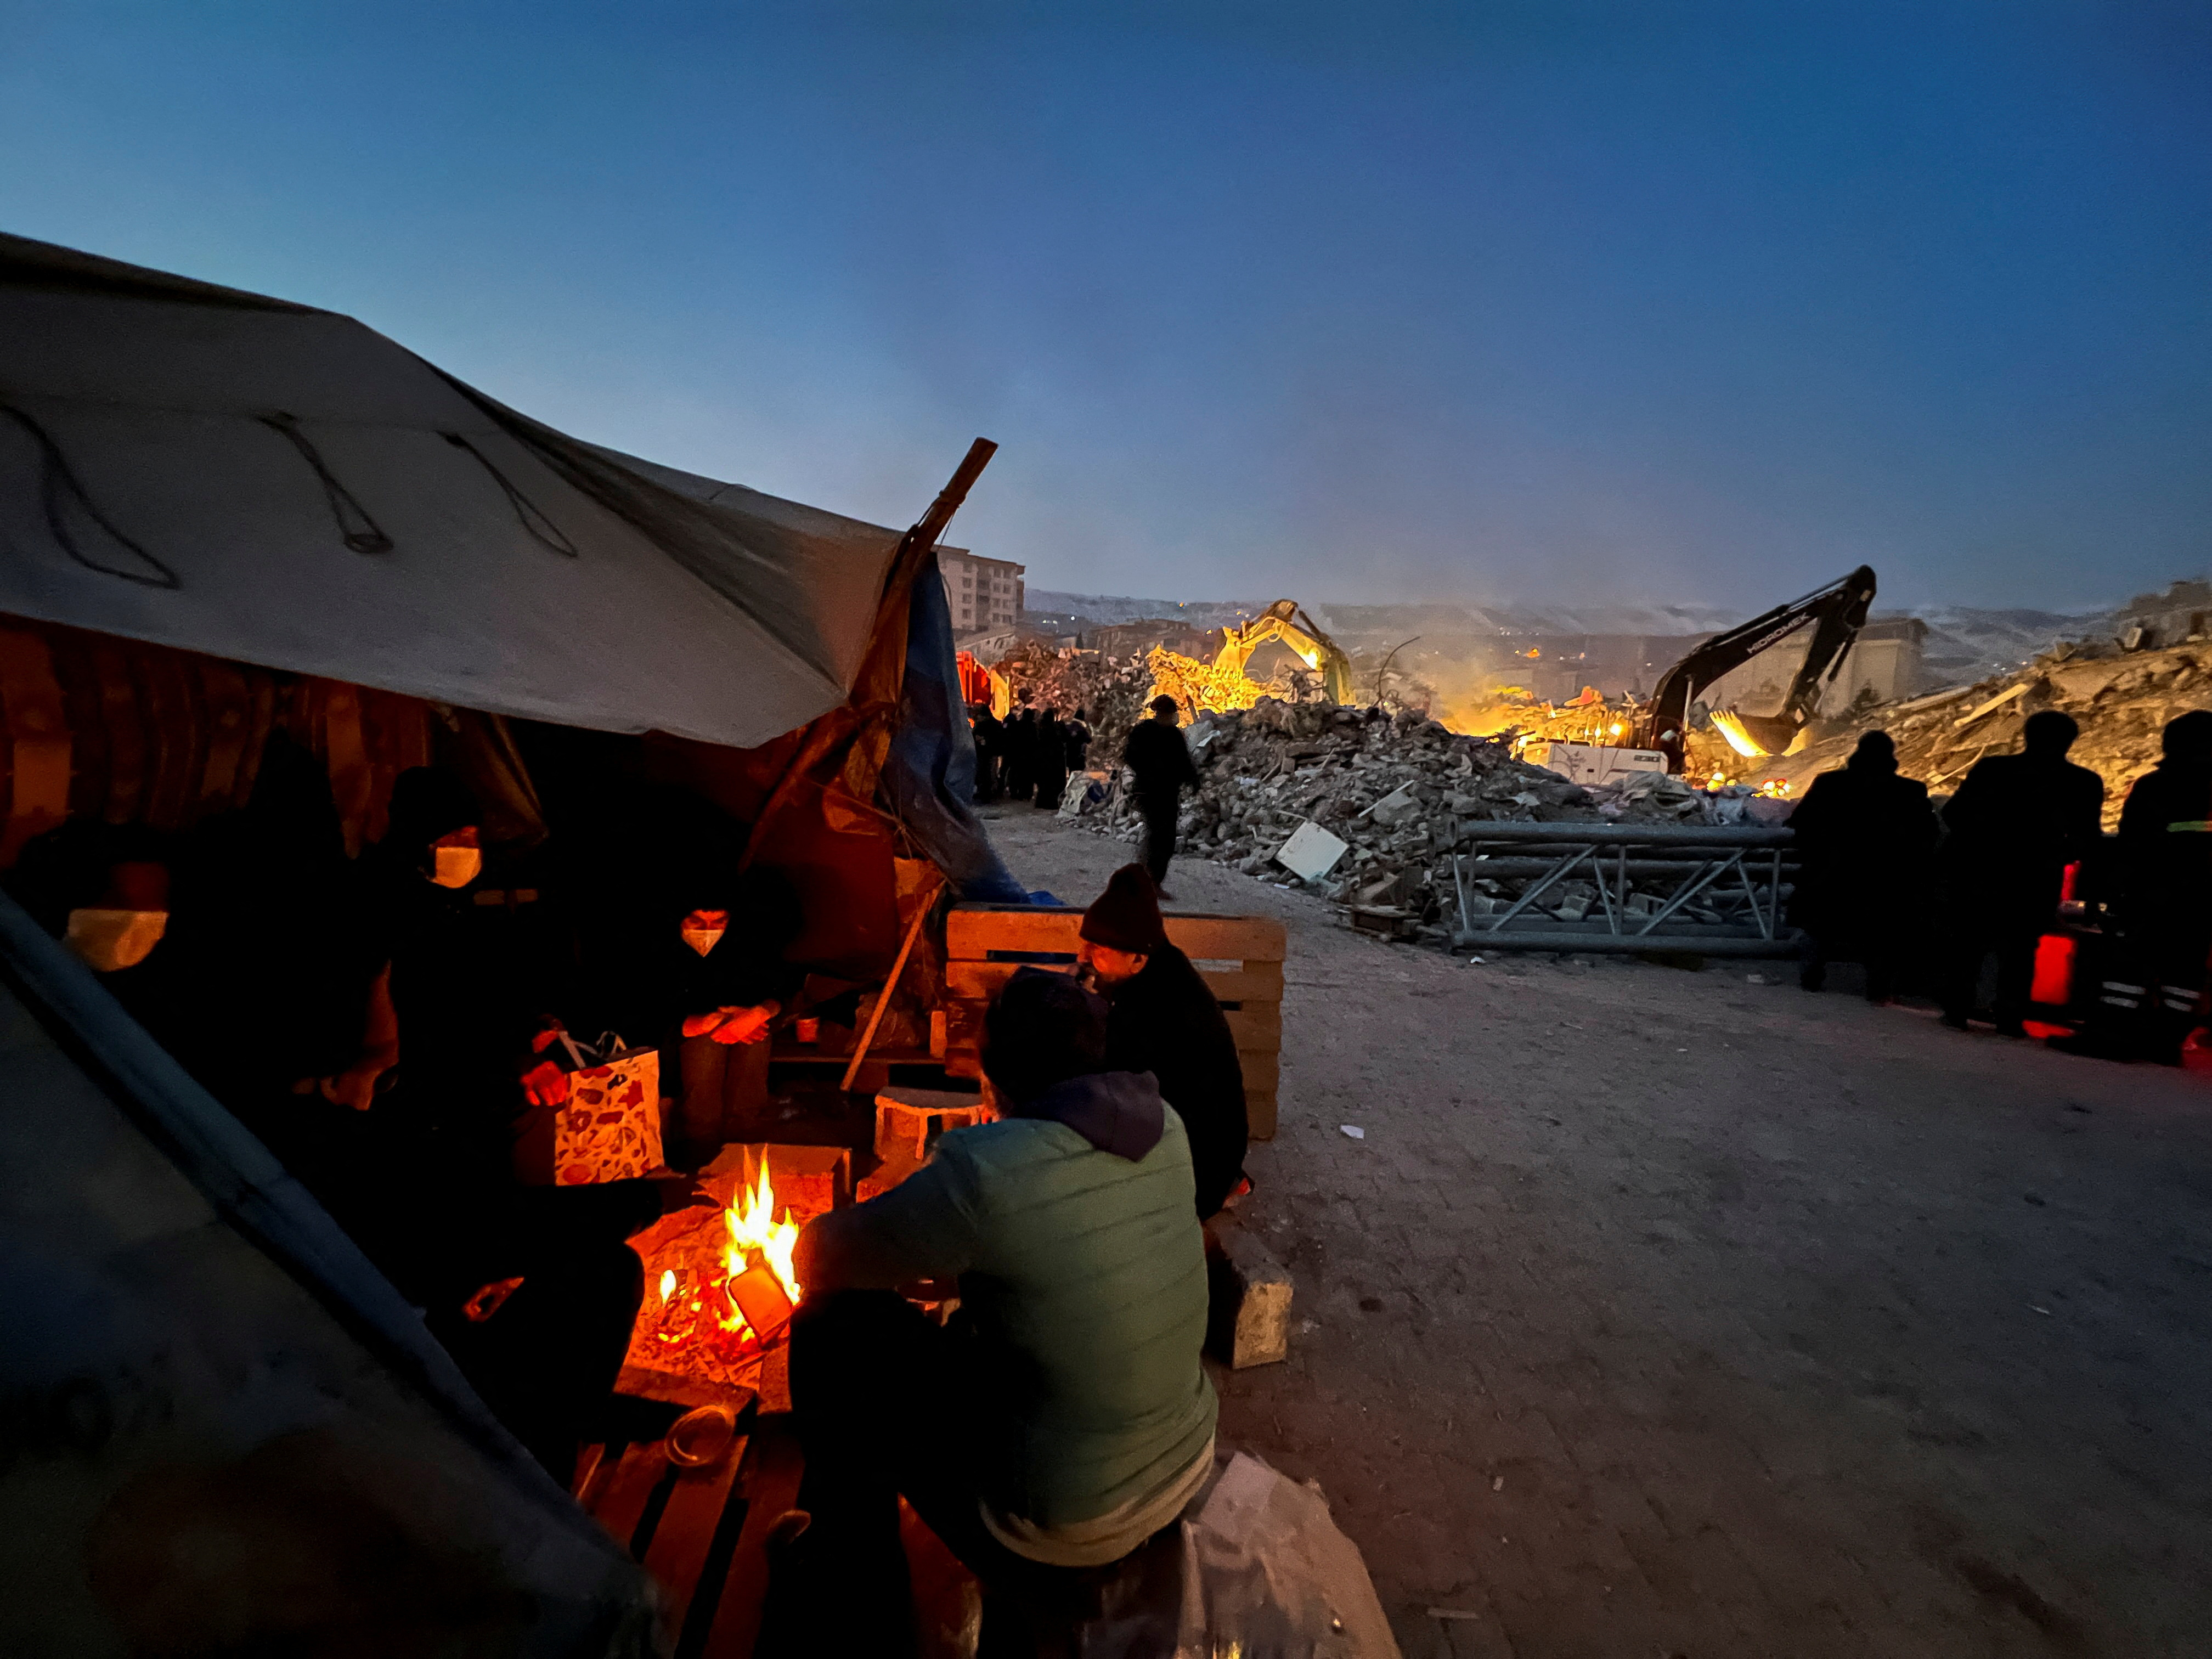 People sit around a fire near the site of a collapsed building in the aftermath of an earthquake, in Kahramanmaras